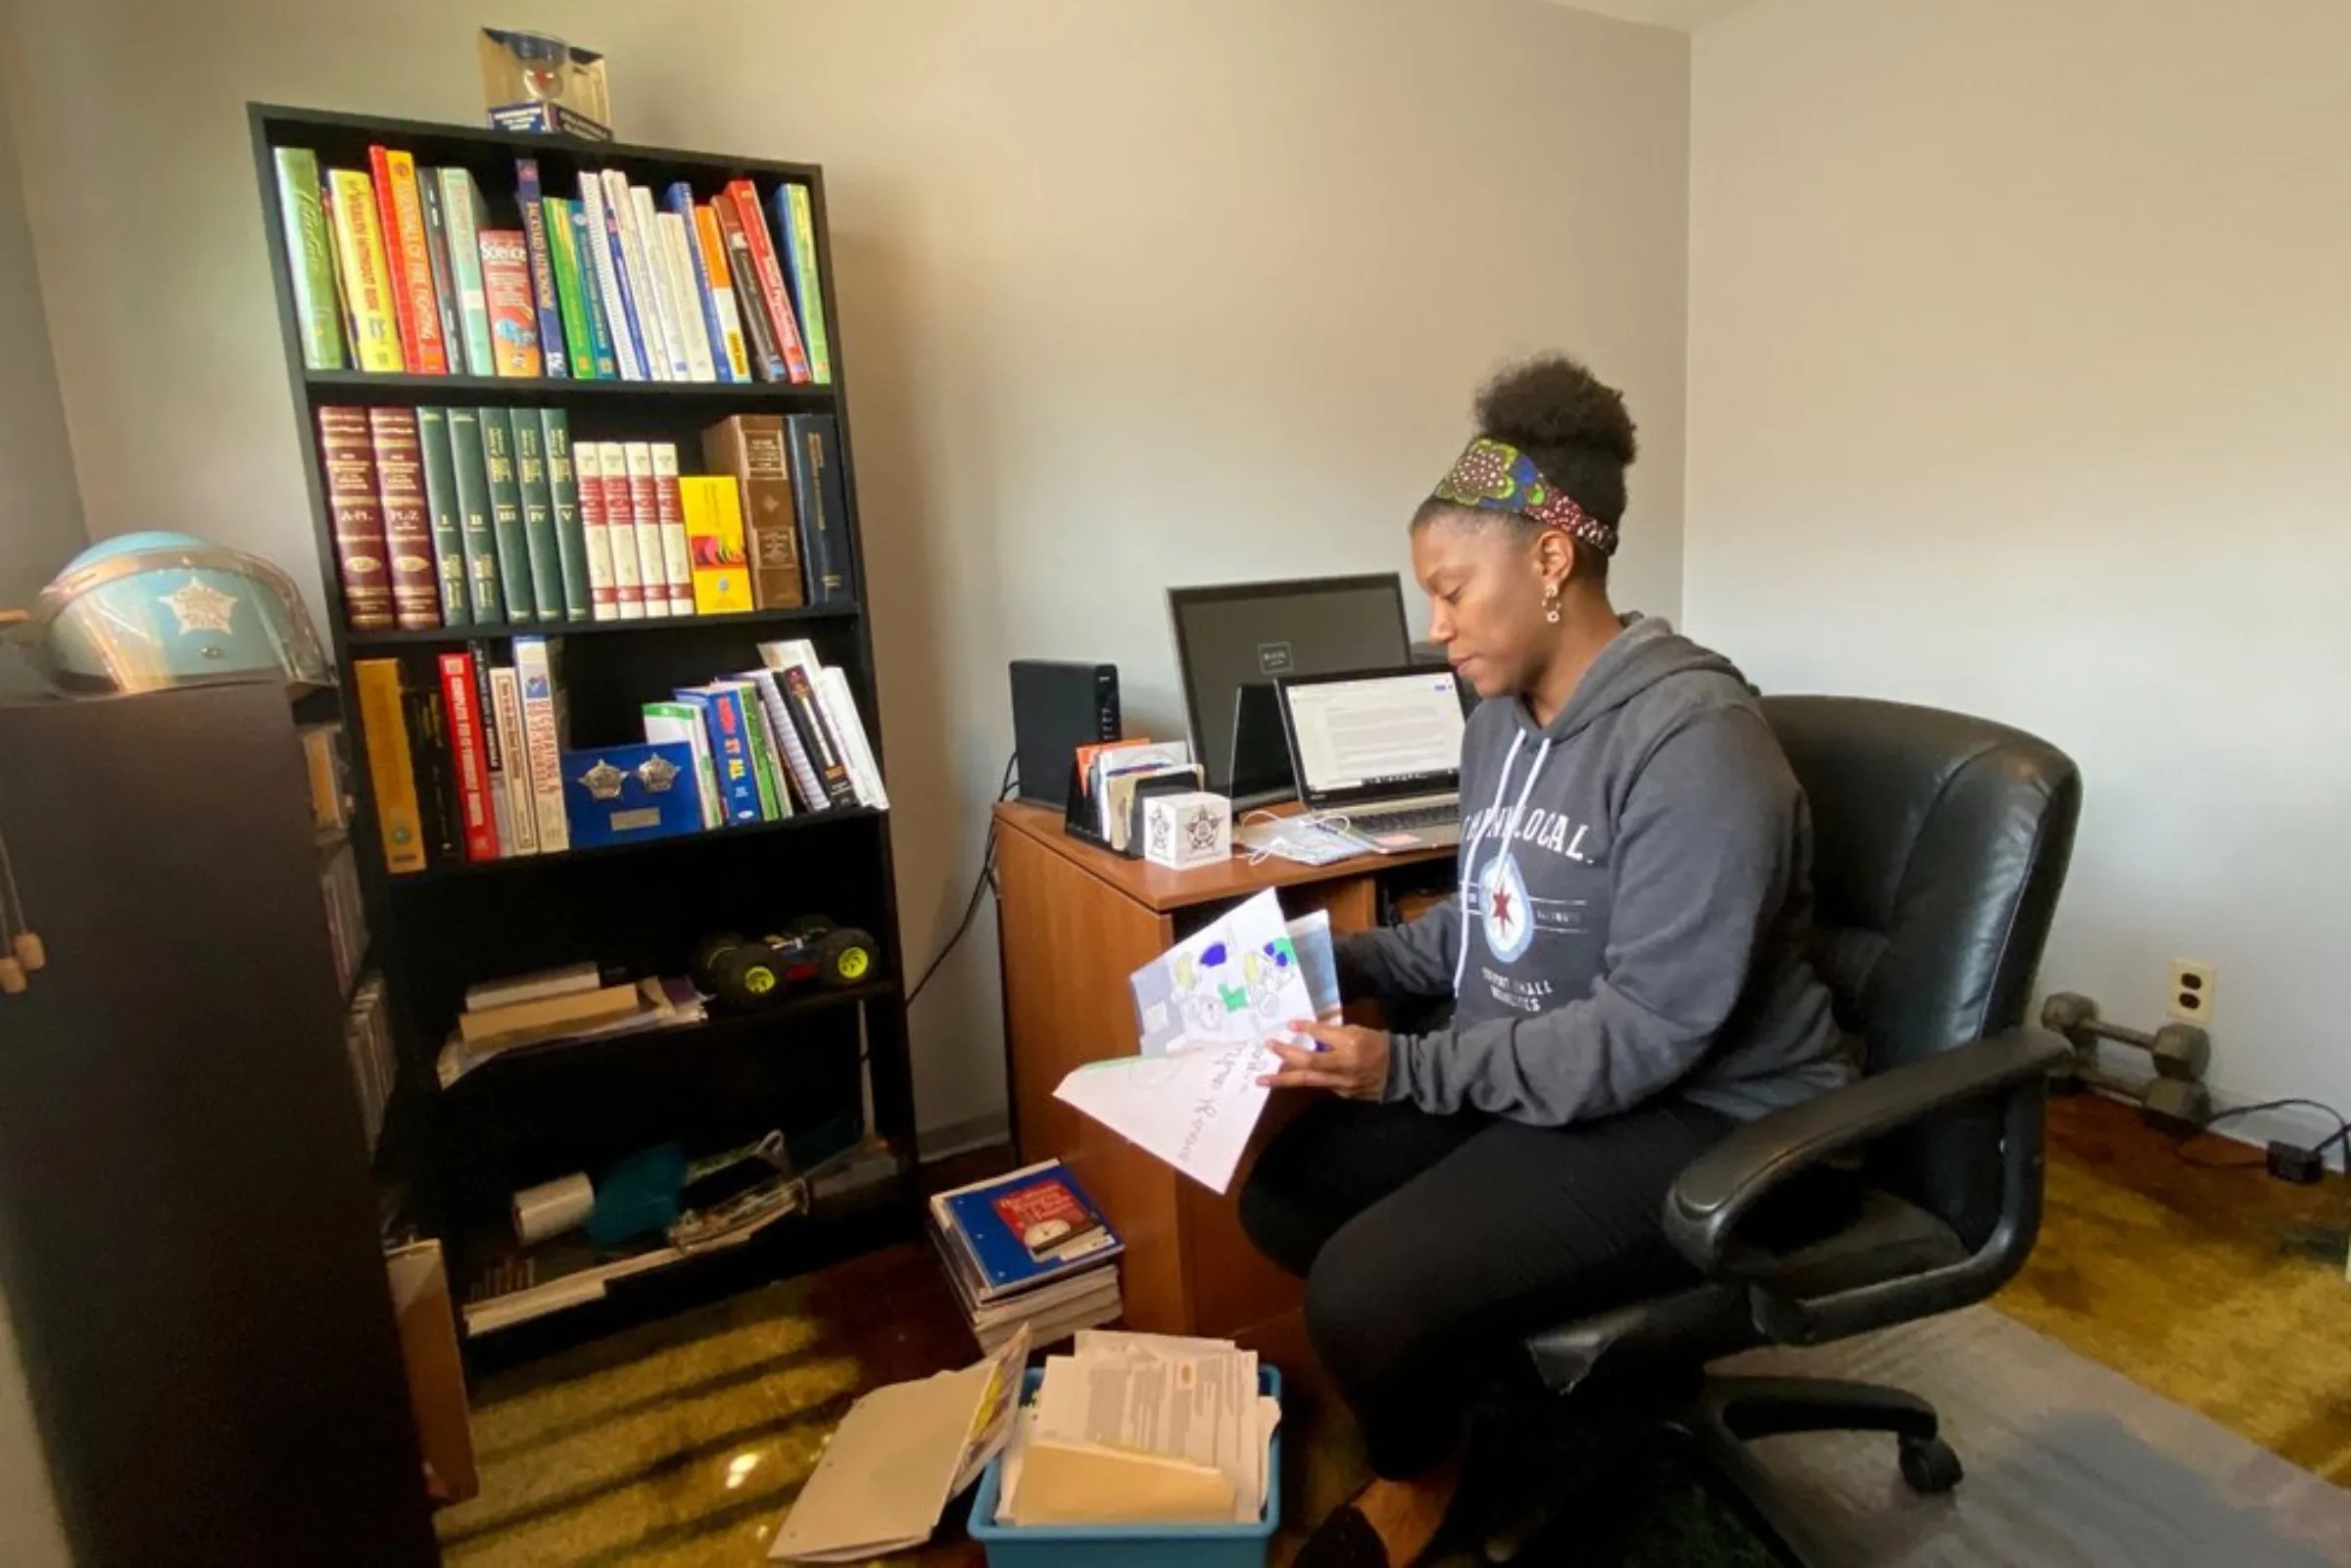 Middle school reading teacher Shayna Boyd prepares for the start of remote teaching due to coronavirus disease (COVID-19) restrictions in her home office in Chicago, Illinois, U.S. April 8, 2020.